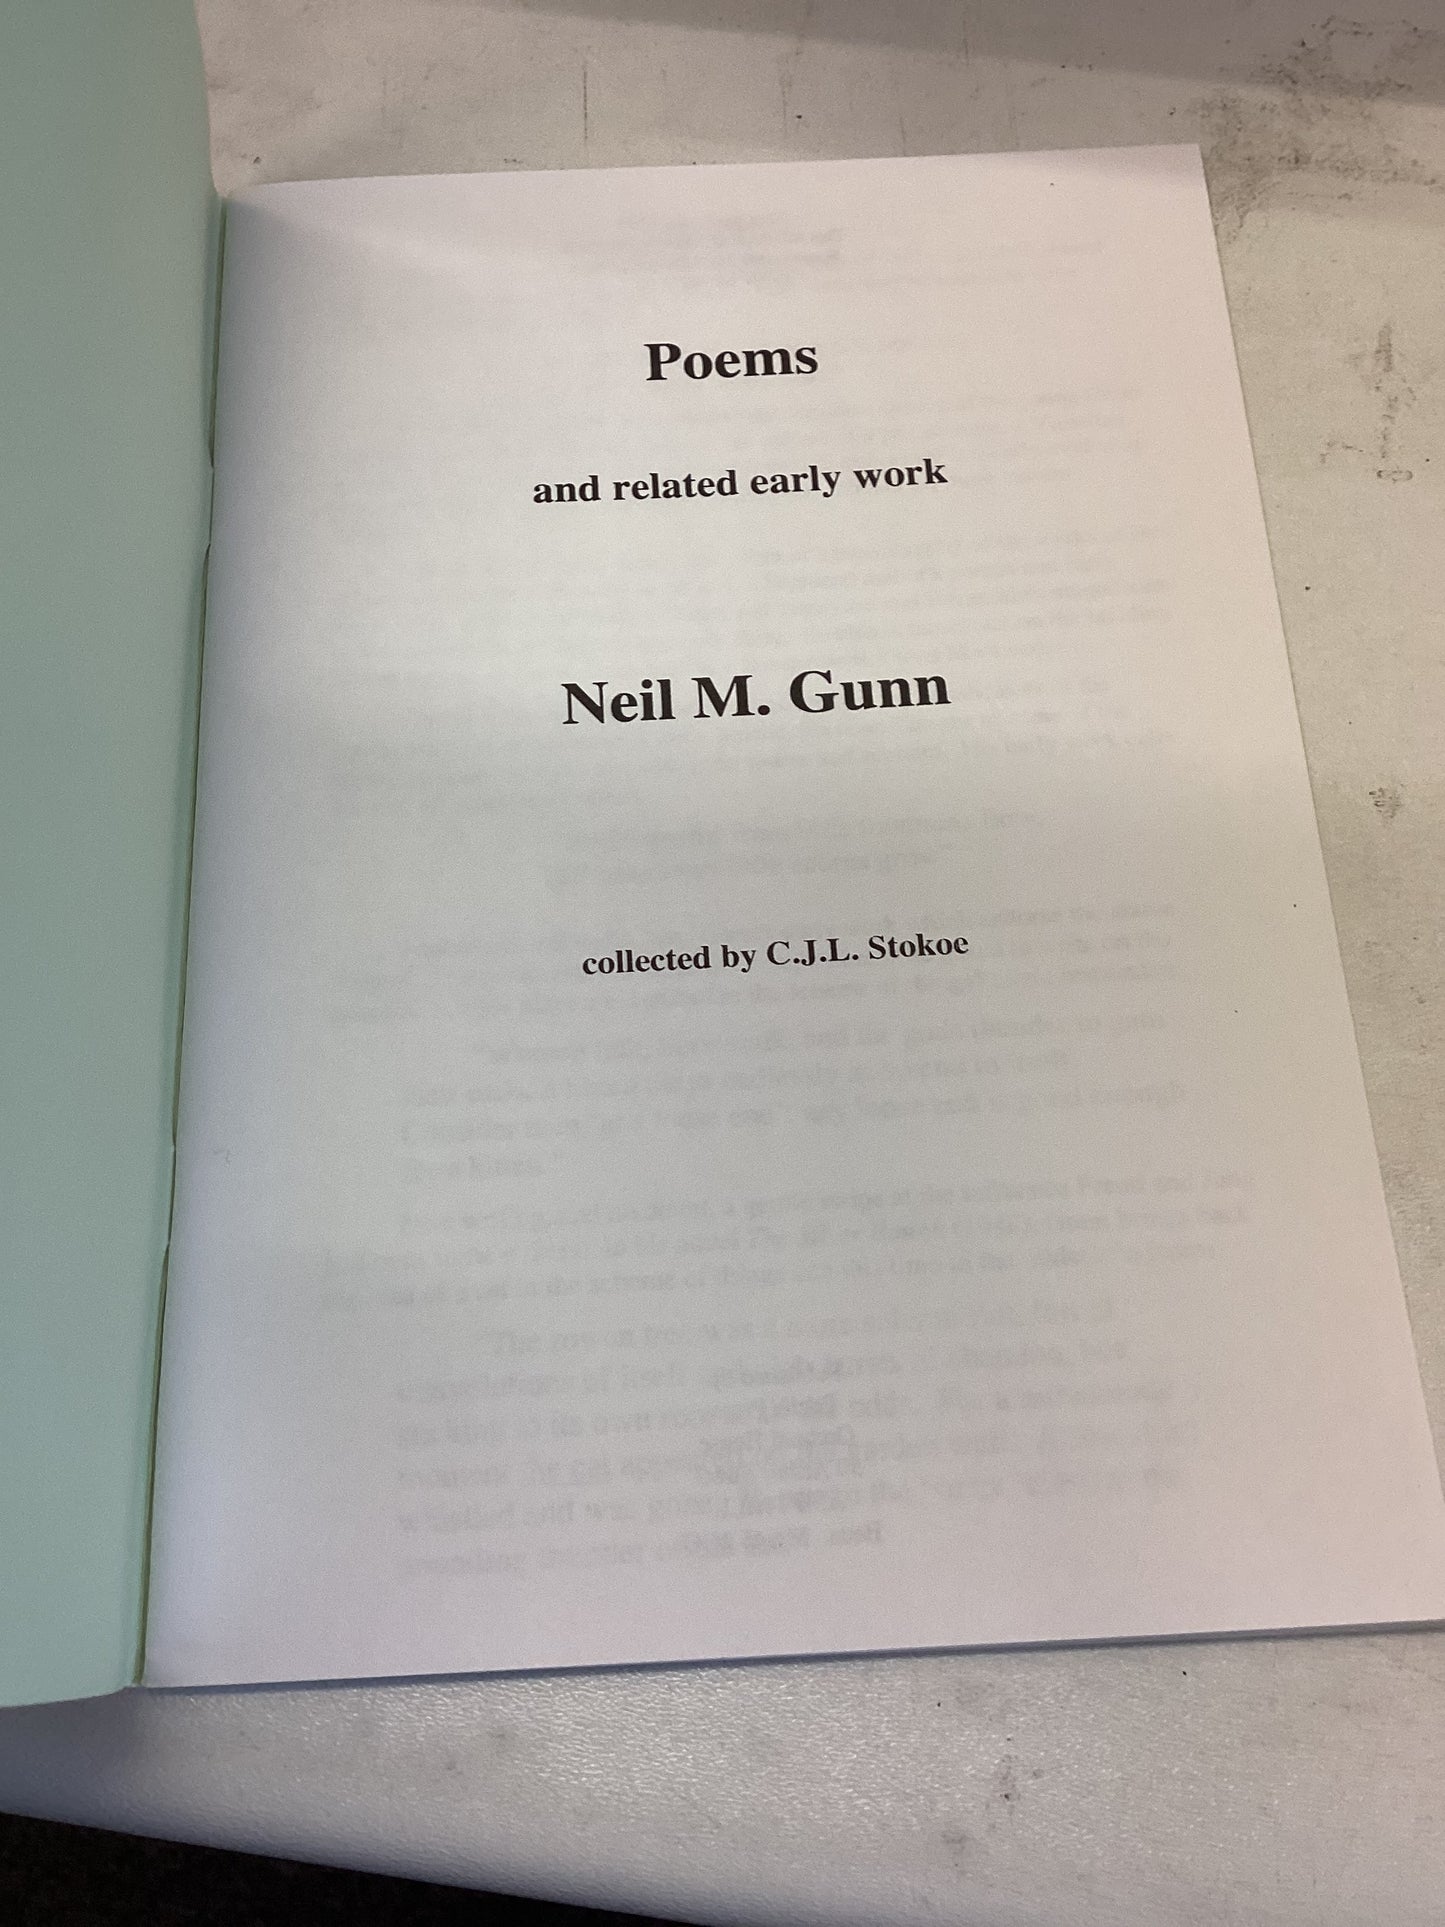 Poems and Related Early Work Neil M Gunn 1891 - 1973 Collected By C J L Stokoe